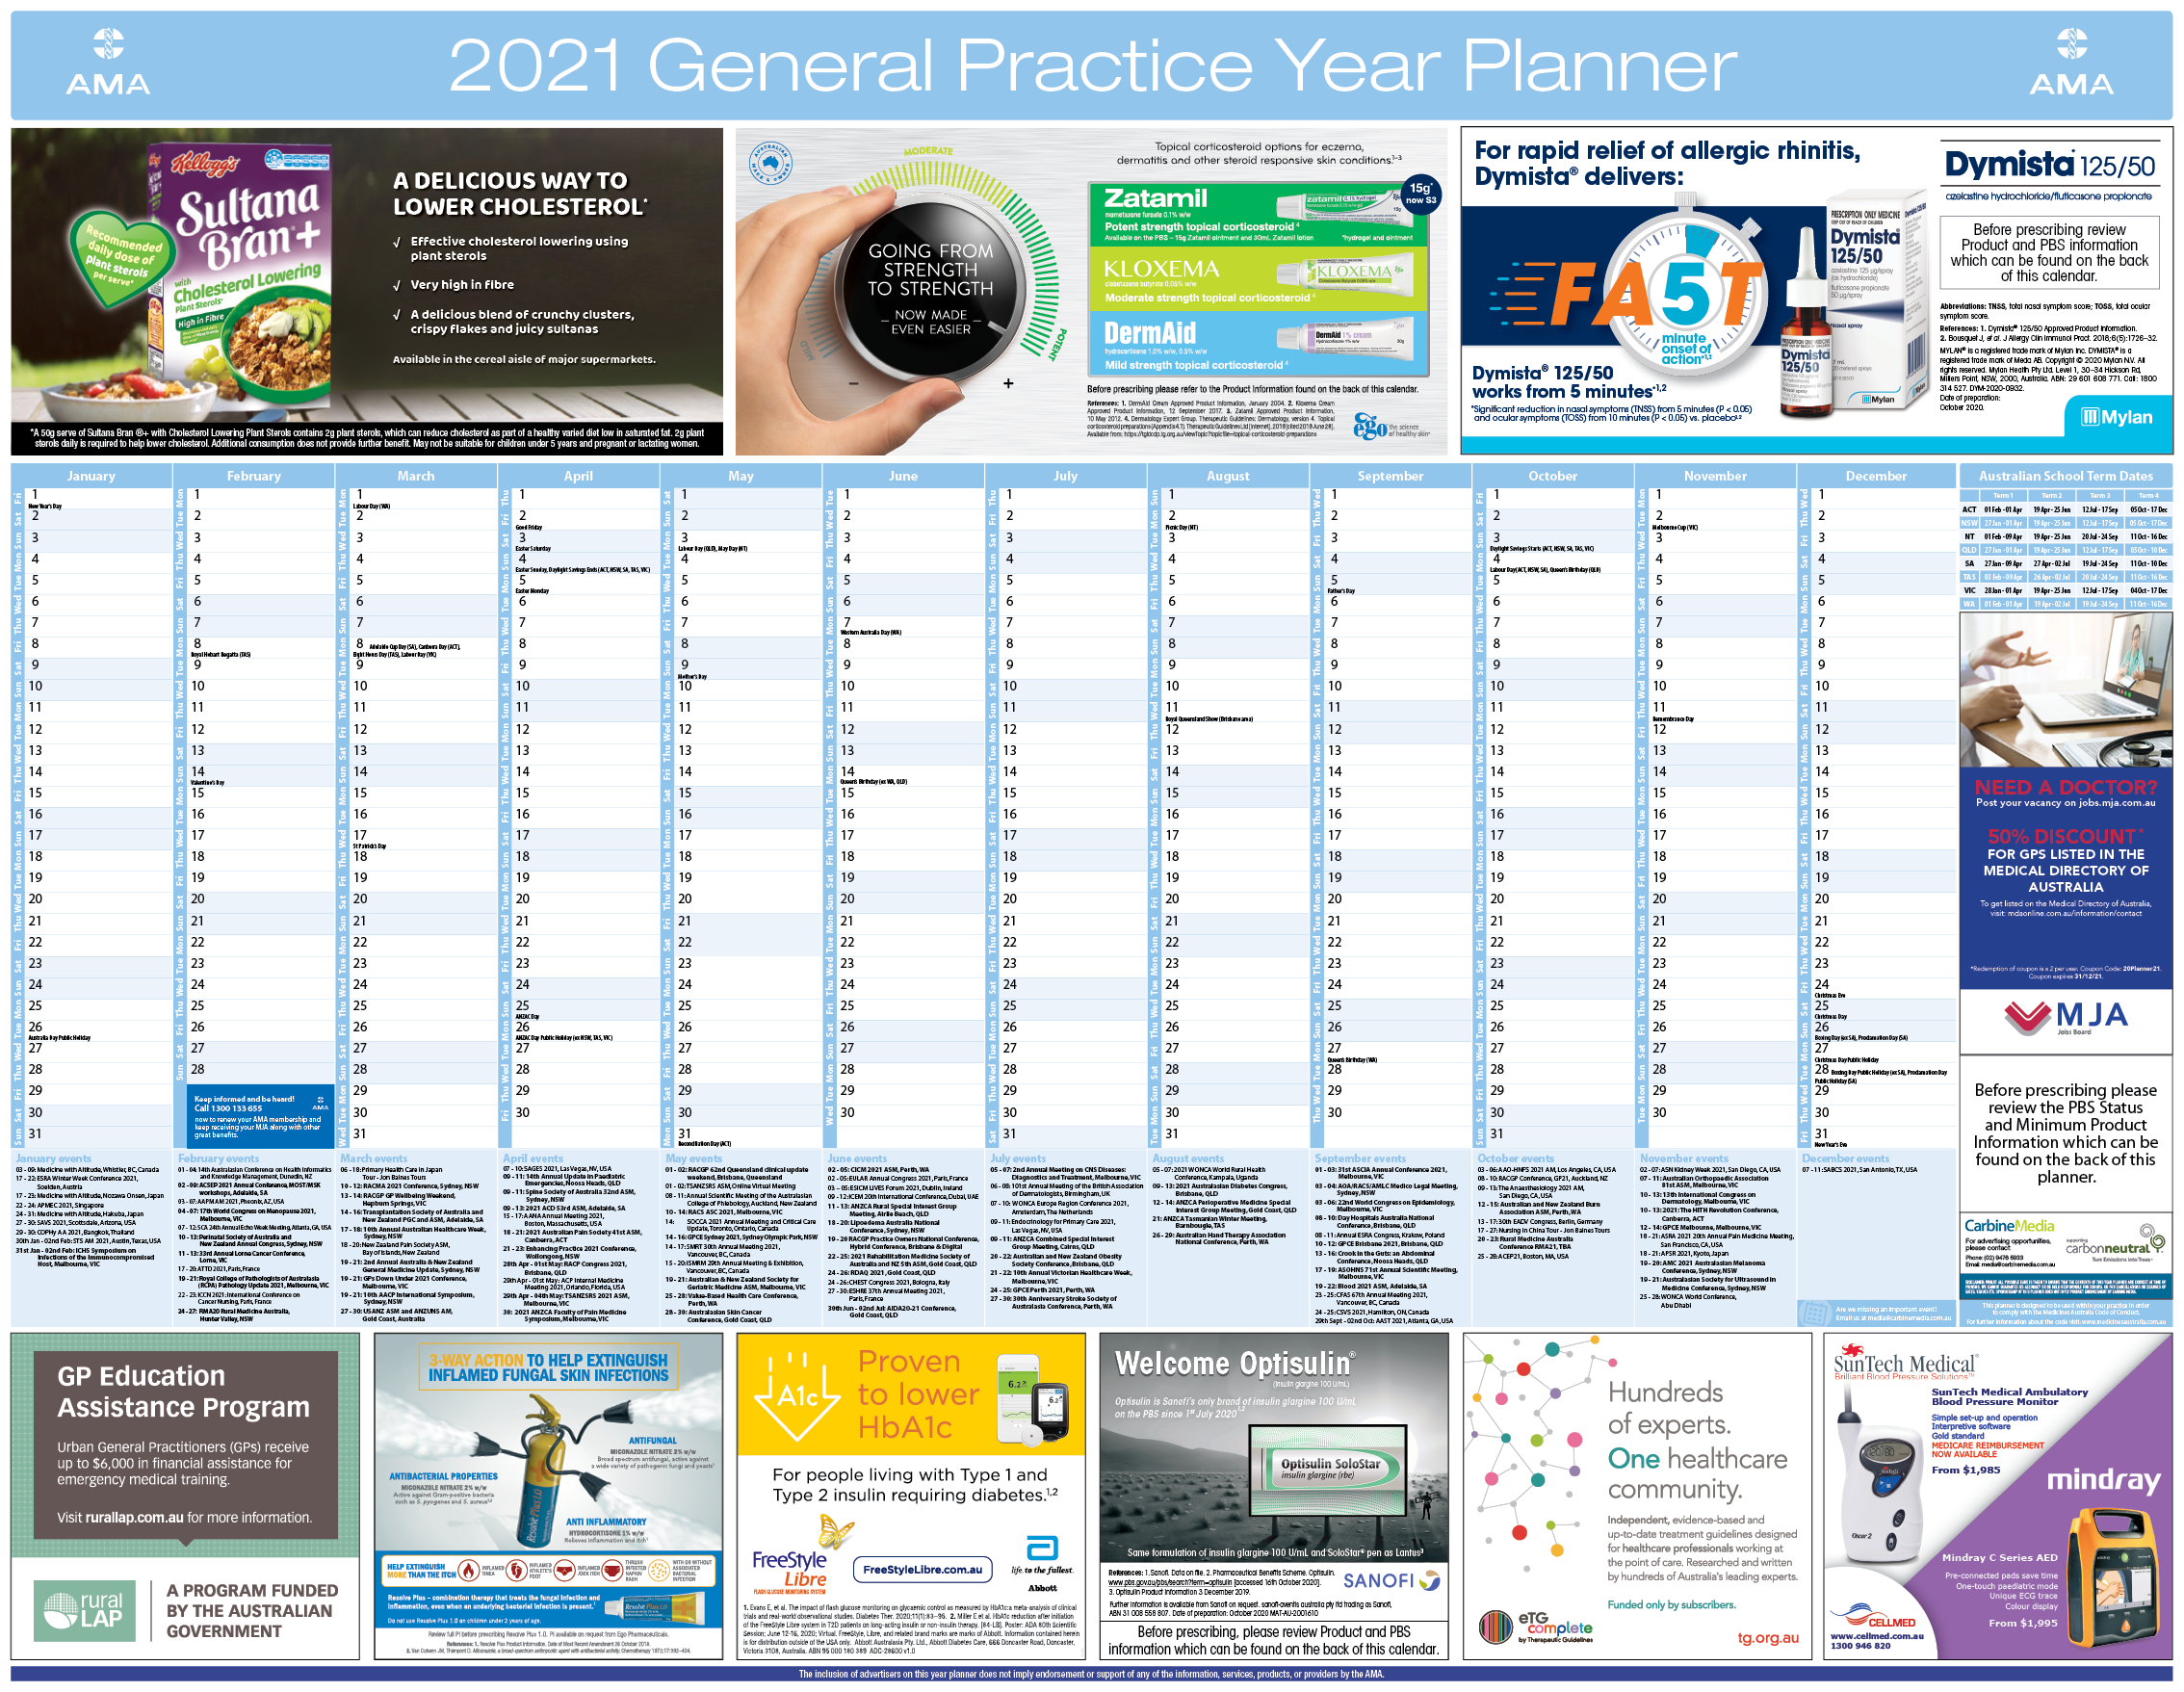 Year Planners for healthcare professionals